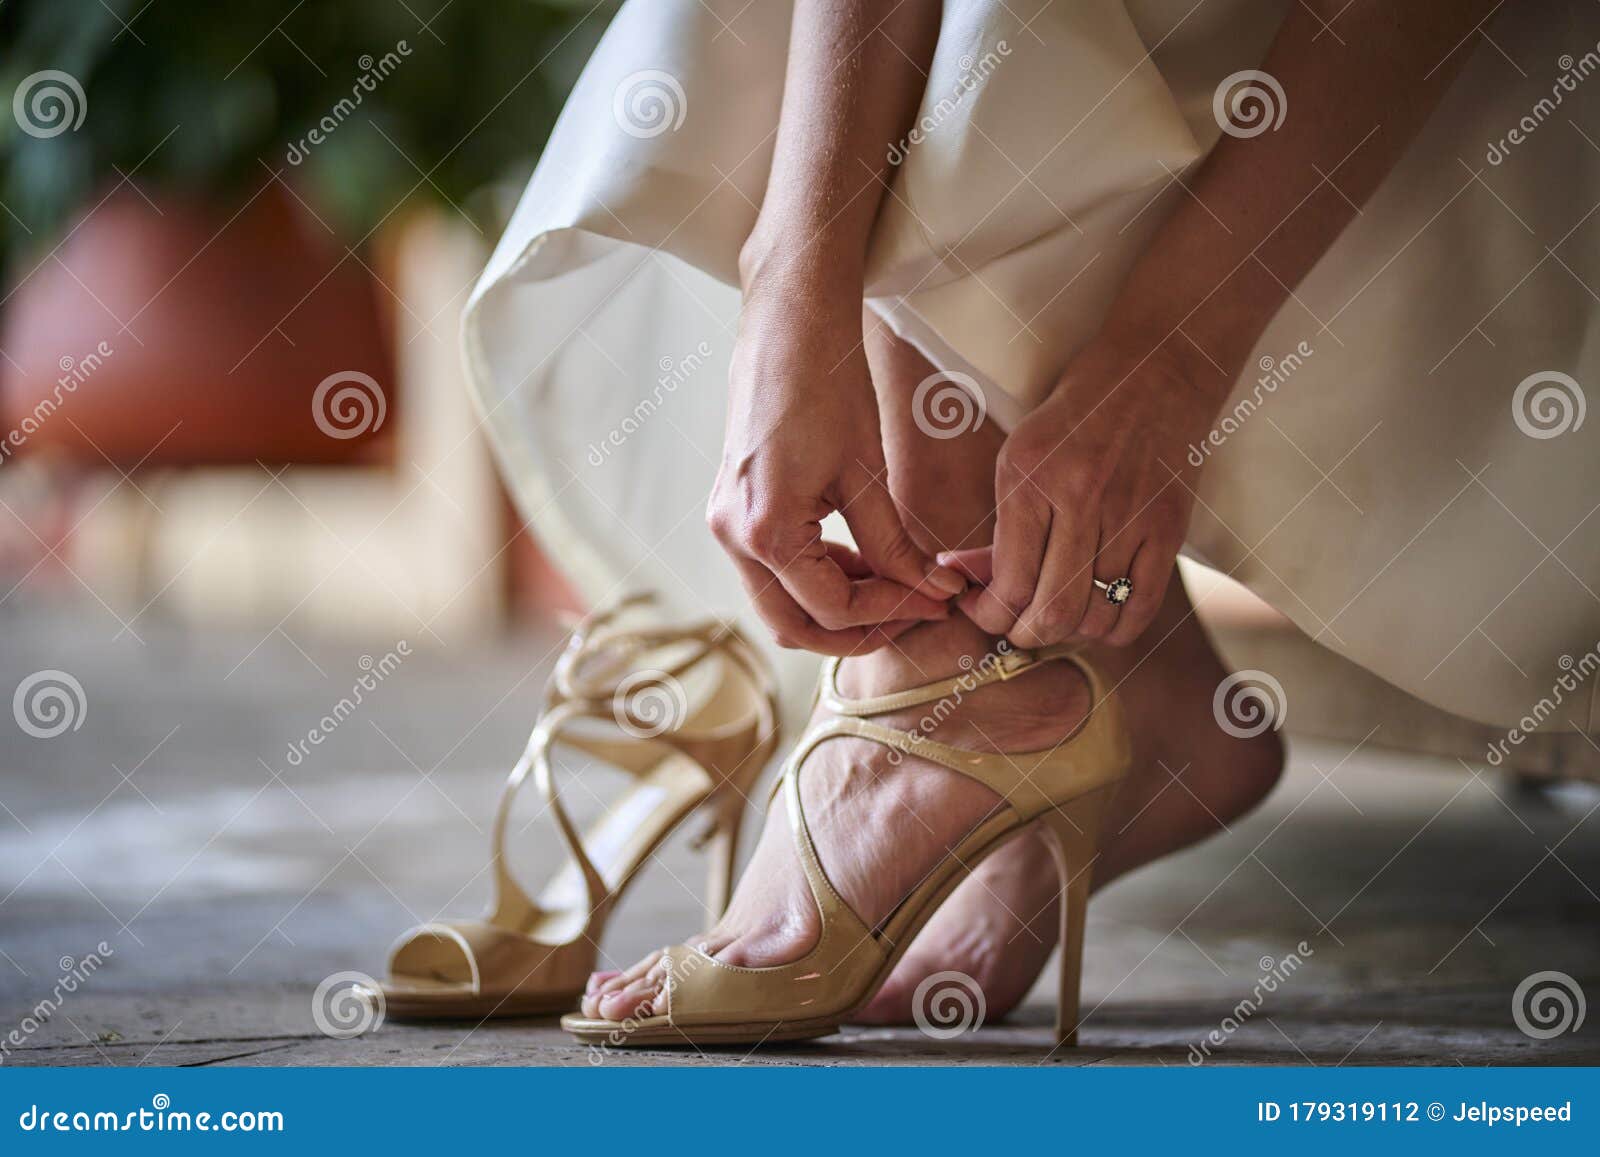 bride in gown putting jimmy choo ivory shoes in a garden previous to bride wearing them for her wedding